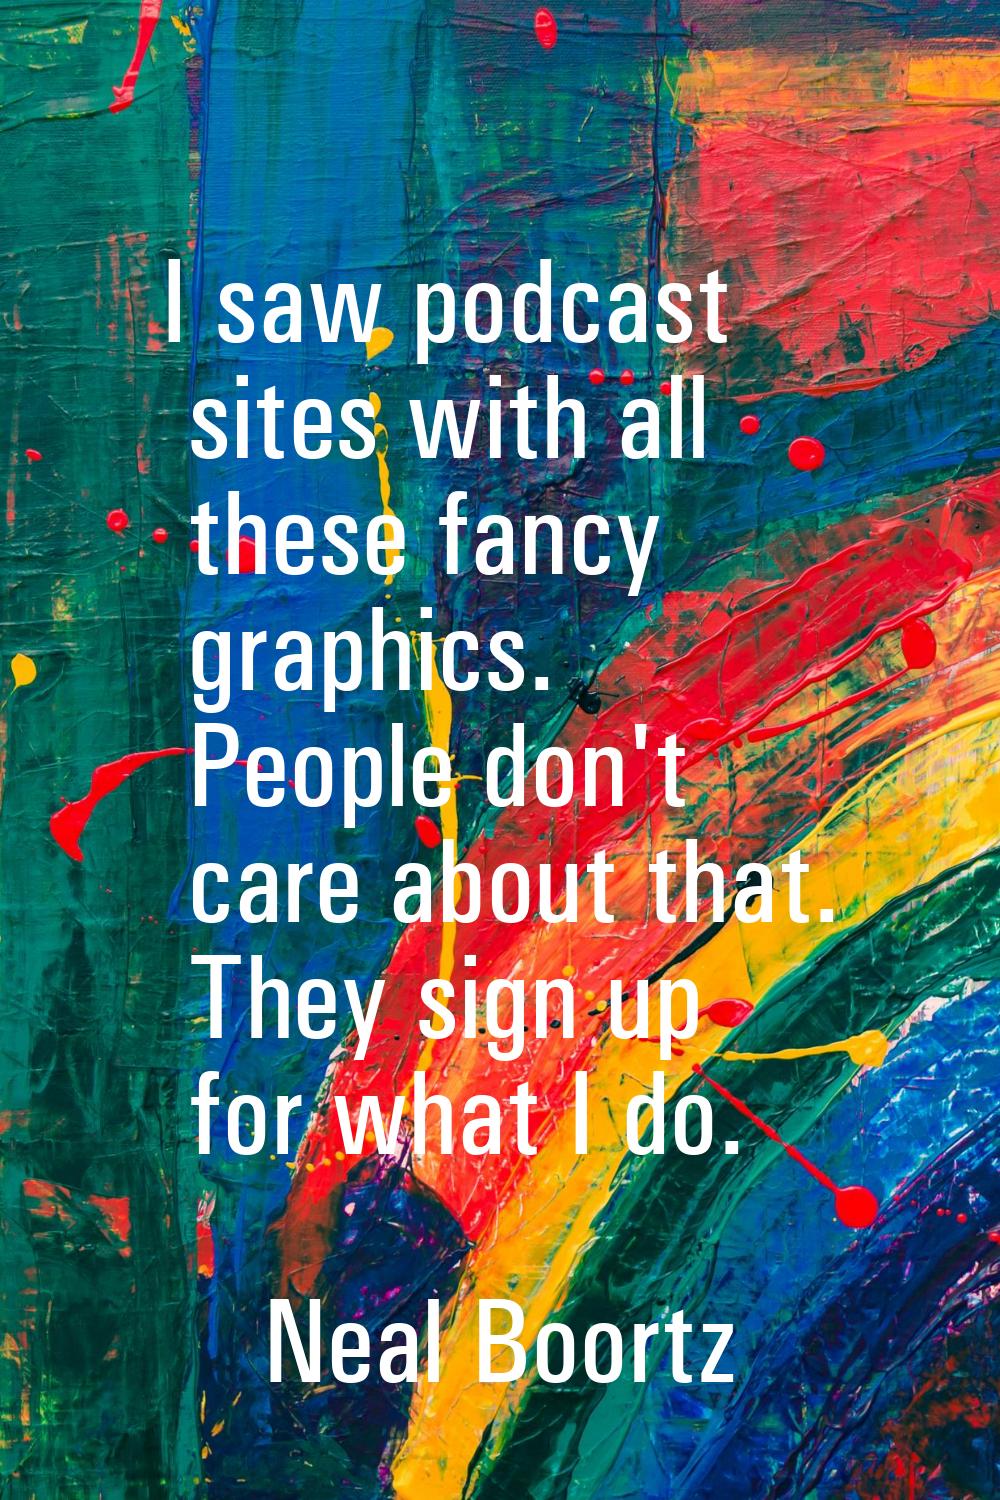 I saw podcast sites with all these fancy graphics. People don't care about that. They sign up for w